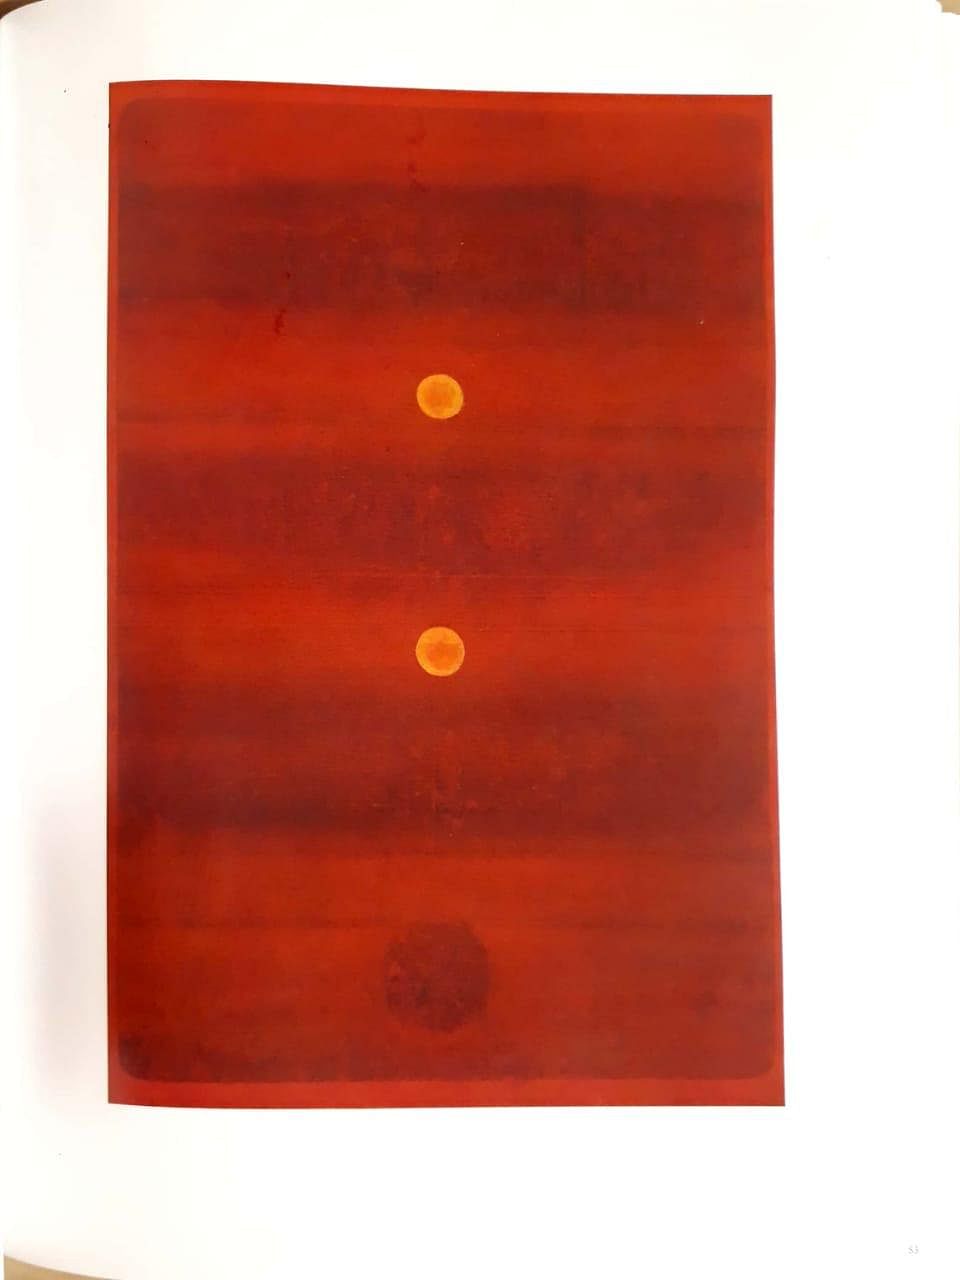 Gaitonde's art now in top 5 most expensive Indian works